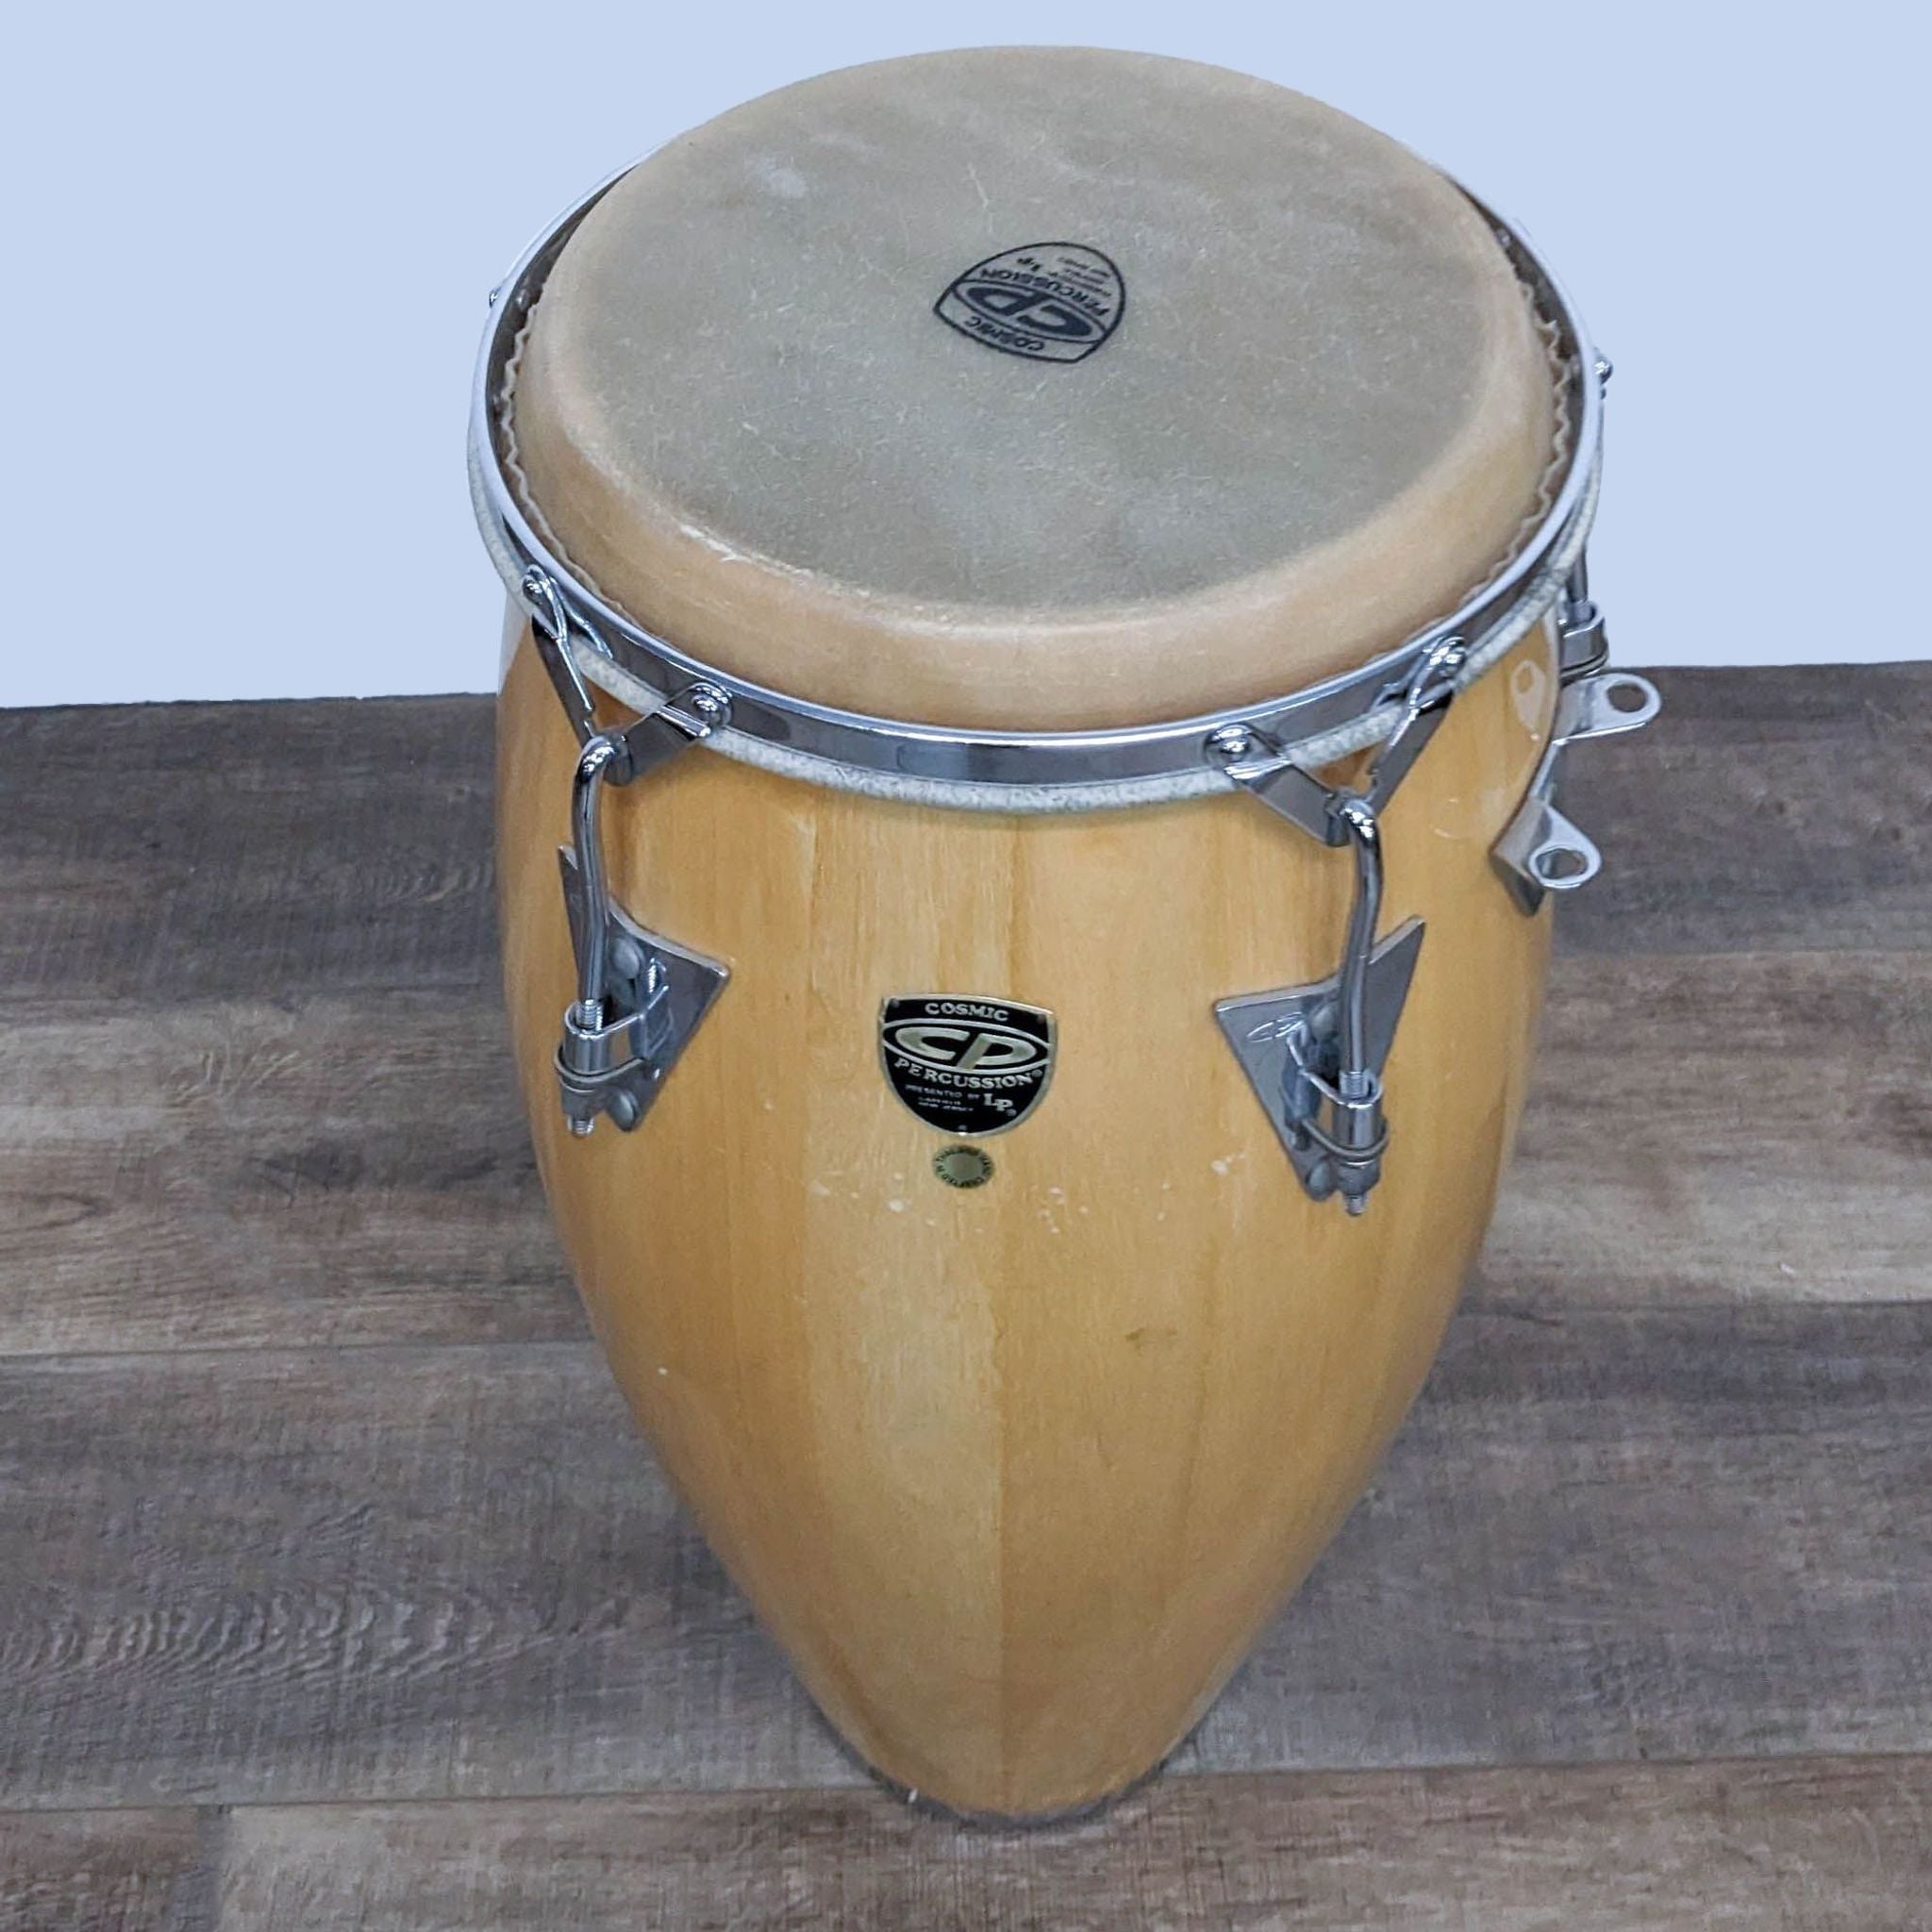 Alt text 2: Top view of a Cosmic Percussion conga drum showing the natural skin drumhead and chrome tuning lugs, ready for musical performance.